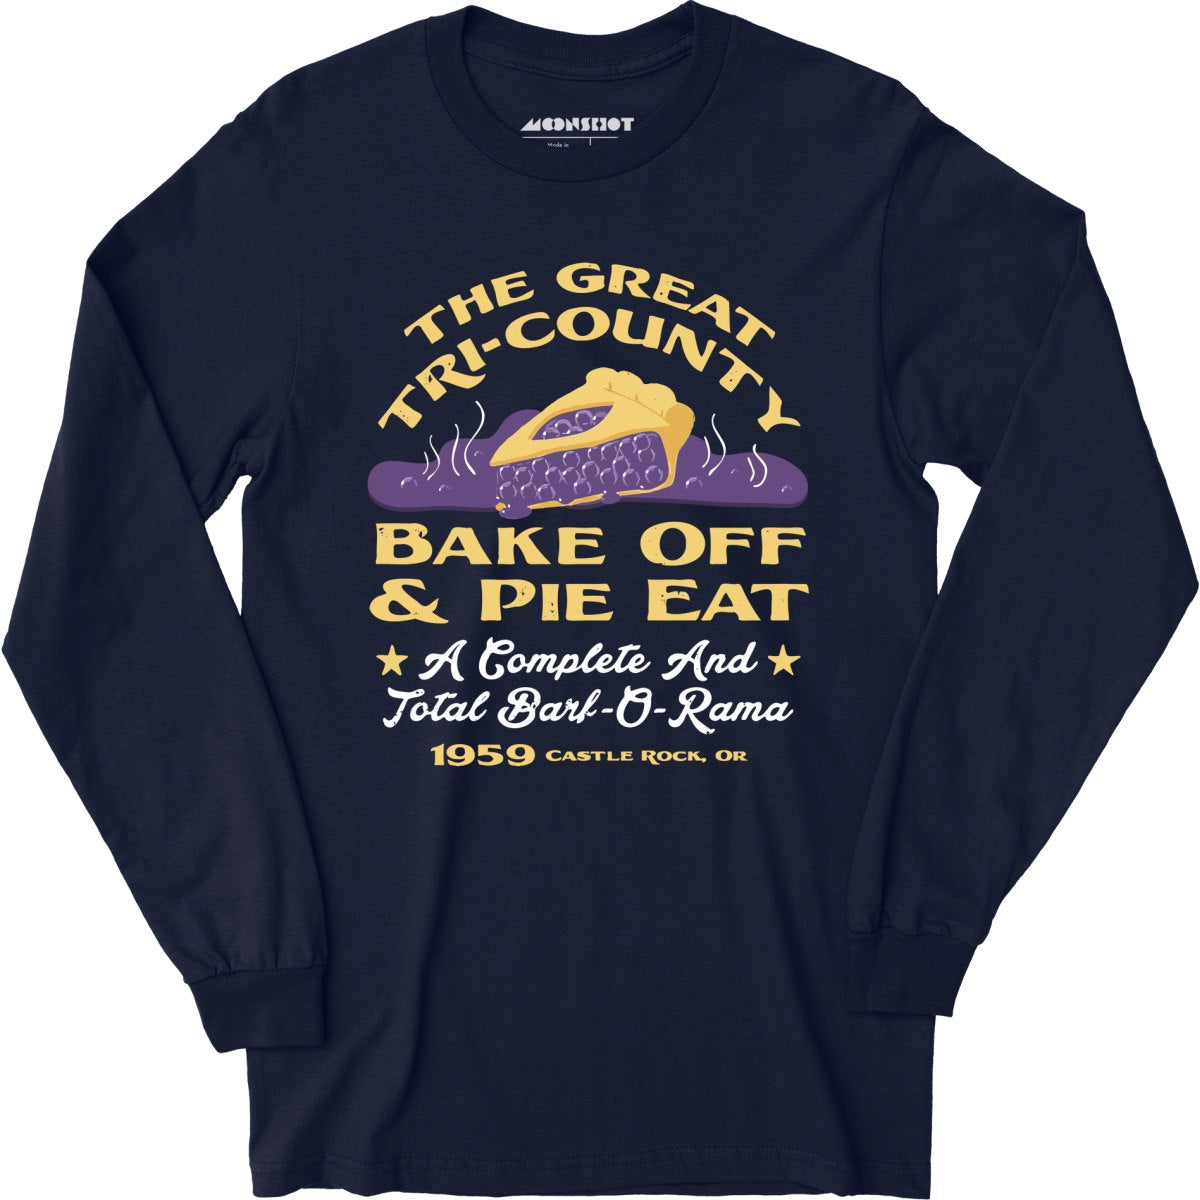 The Great Tri-County Bake Off & Pie Eat - Long Sleeve T-Shirt